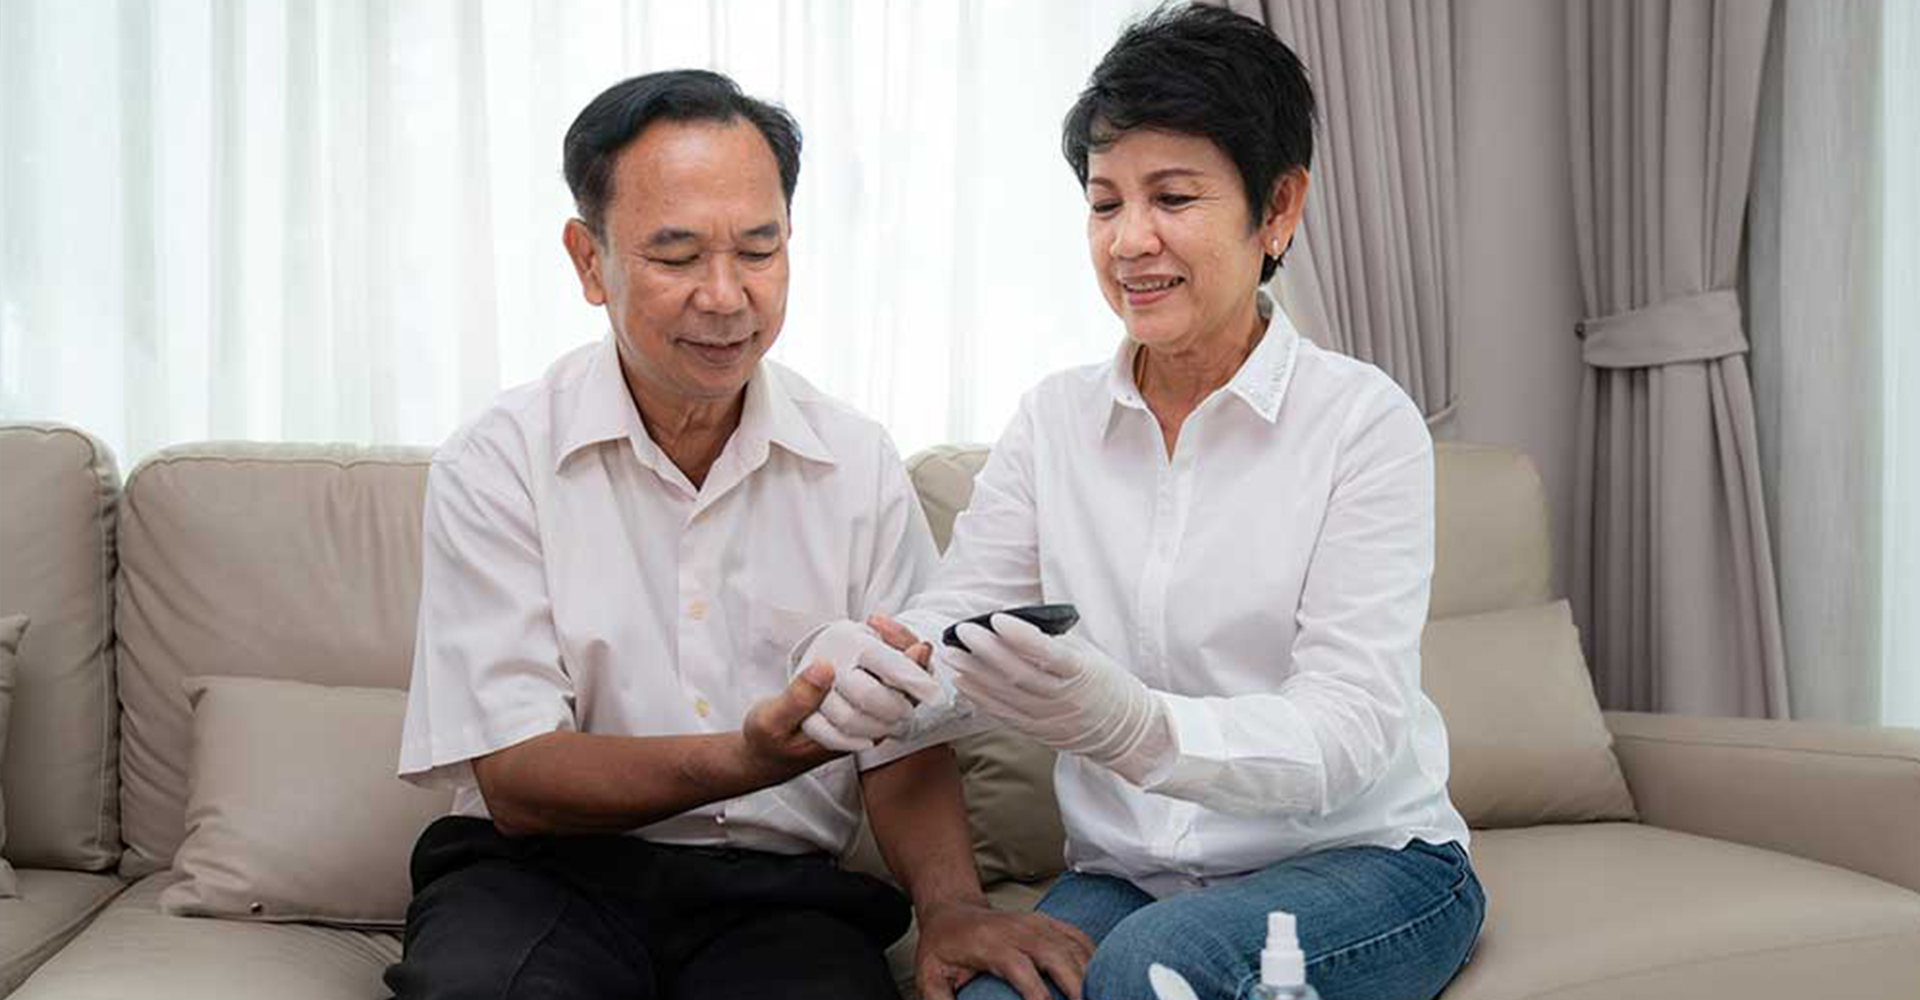 patient treatment adherence with help of a caregiver